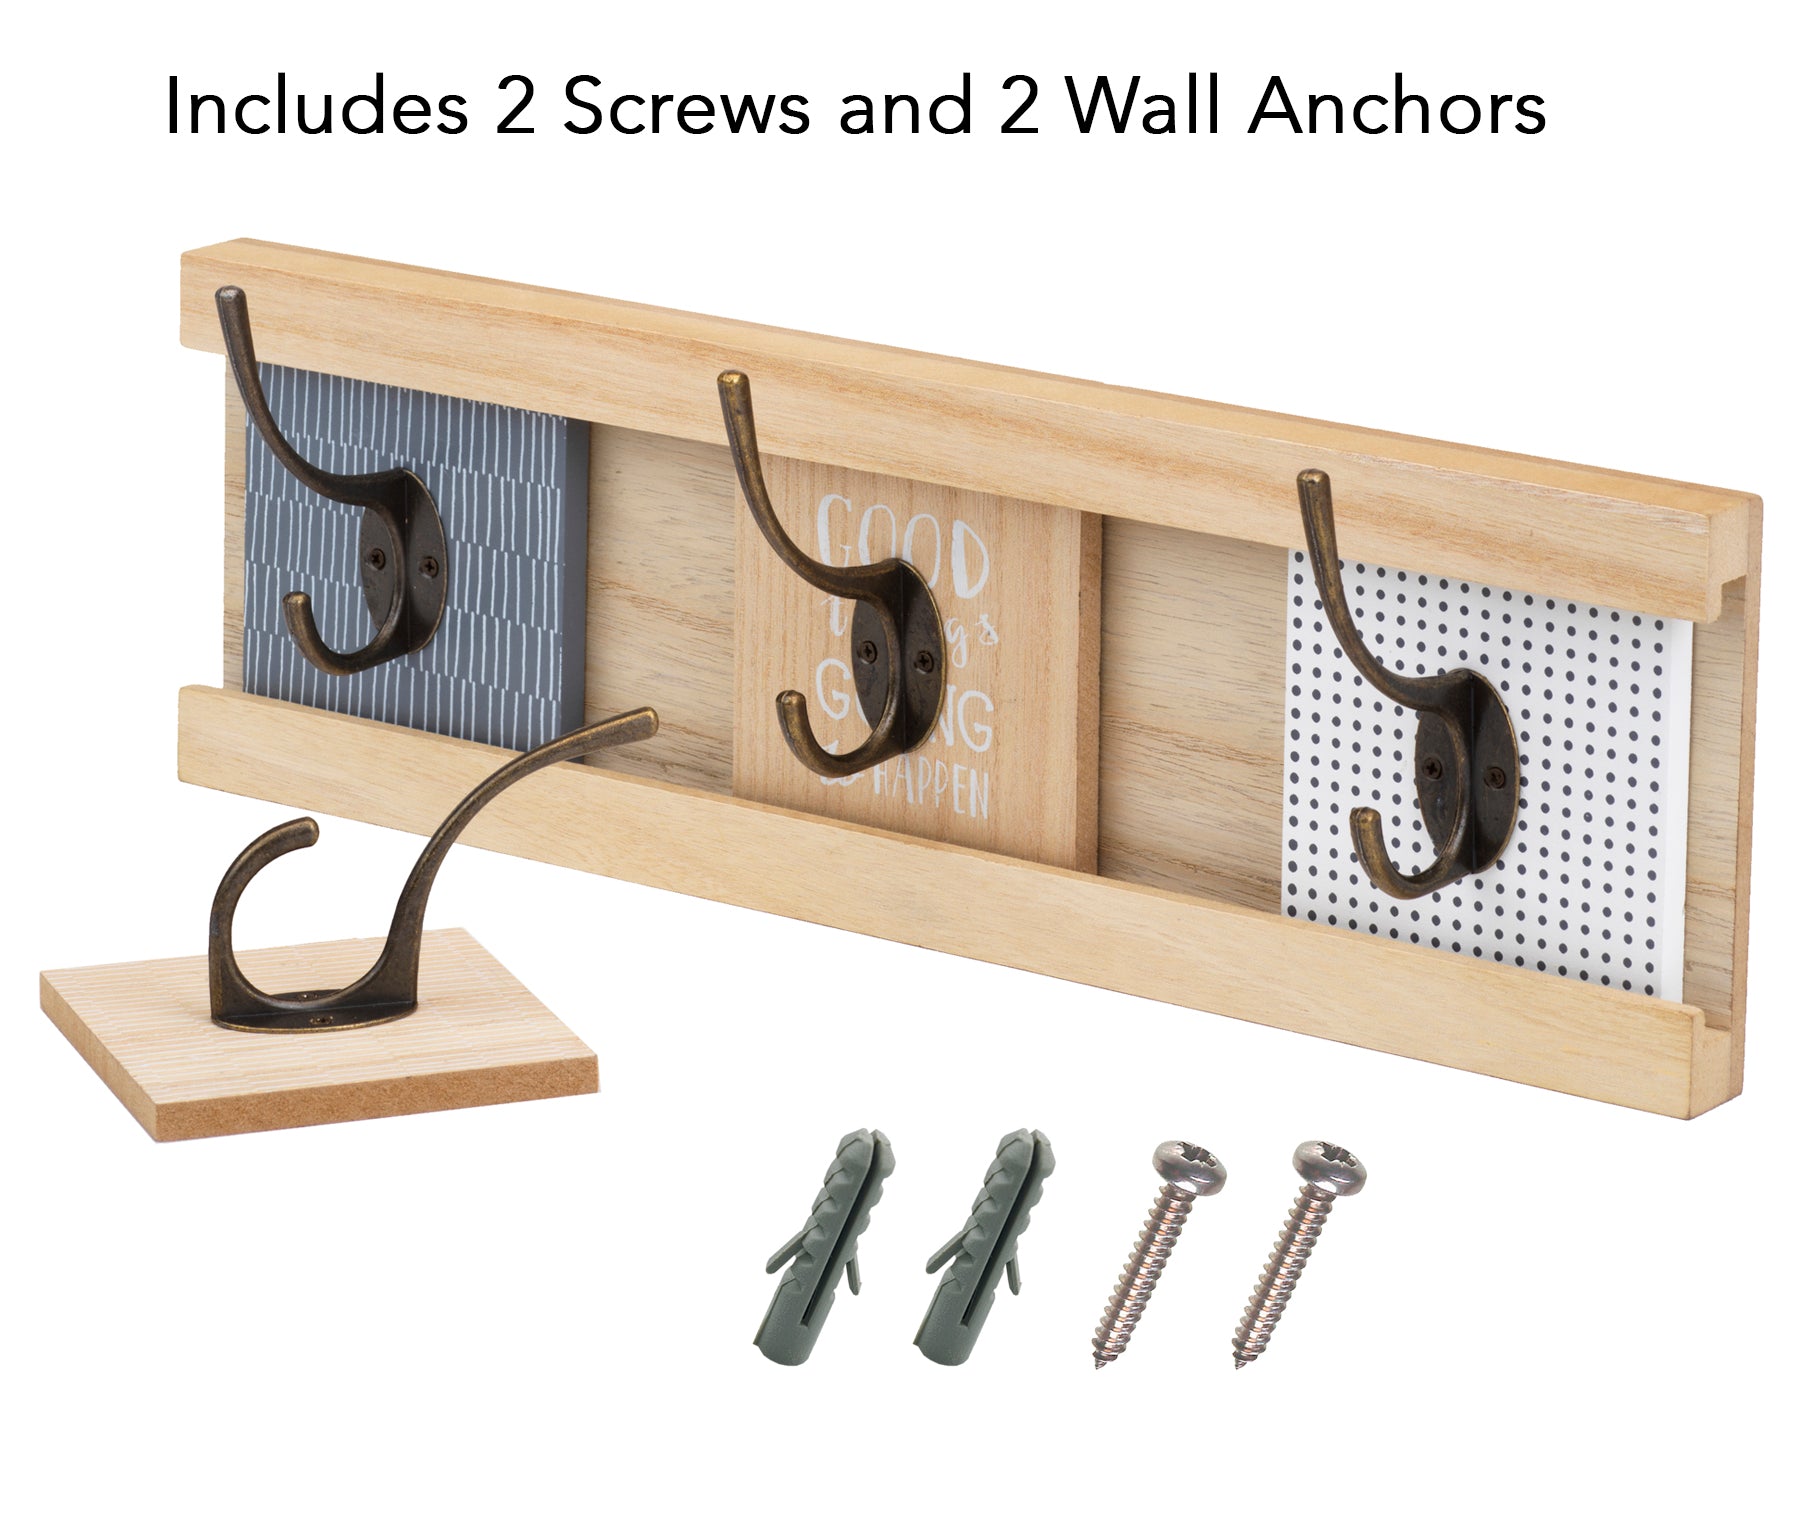 10 Street Home Wall Mount Coat Rack with 4 Adjustable Coat Hooks, for Entryway, Bedroom and Bathroom; Hat Rack, Towel Rack, Natural Wood, Easy to Install